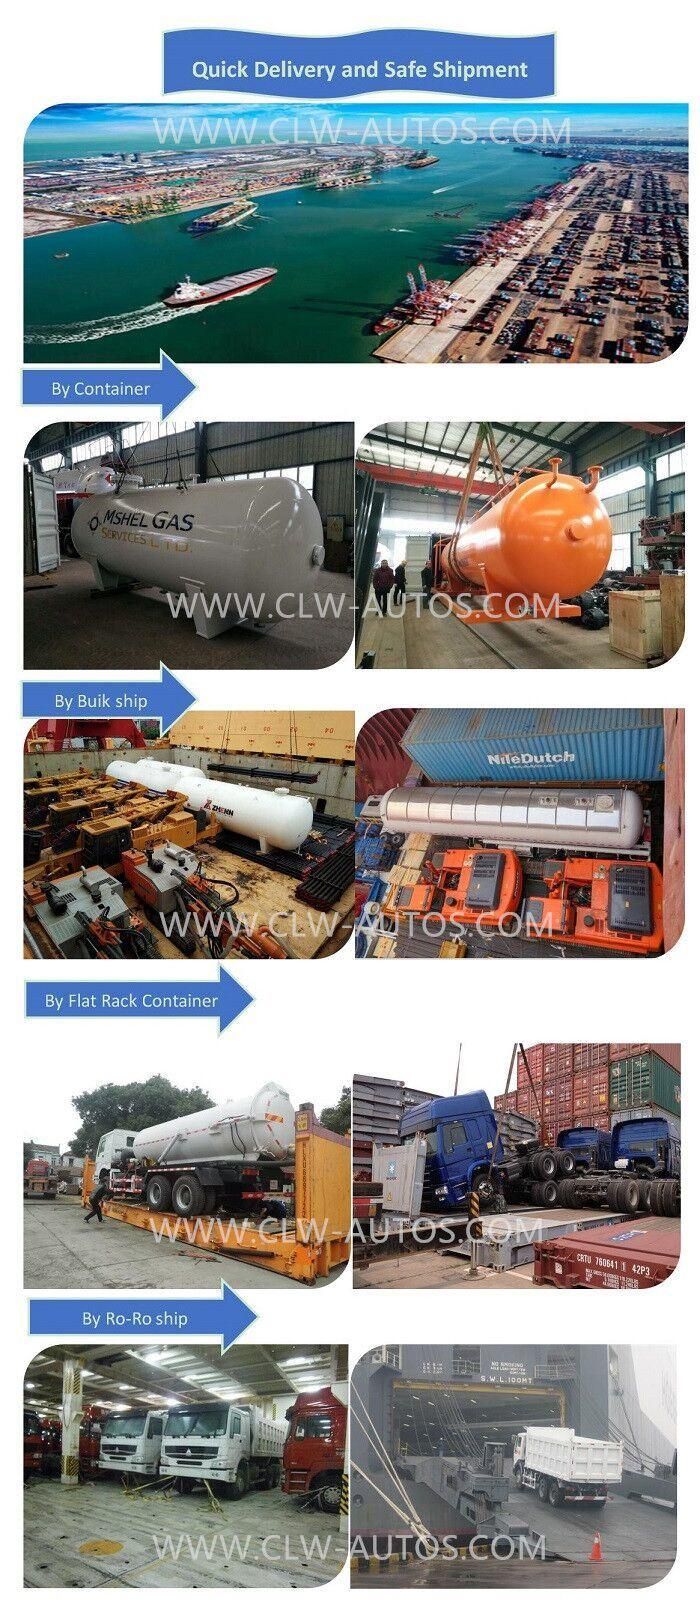 China Factory Price Dongfeng 4*2 8tons 8t City Wells Cleaning Sewage Fecal 8000liters 8cbm 8m3 Street Vacuum Suction Truck